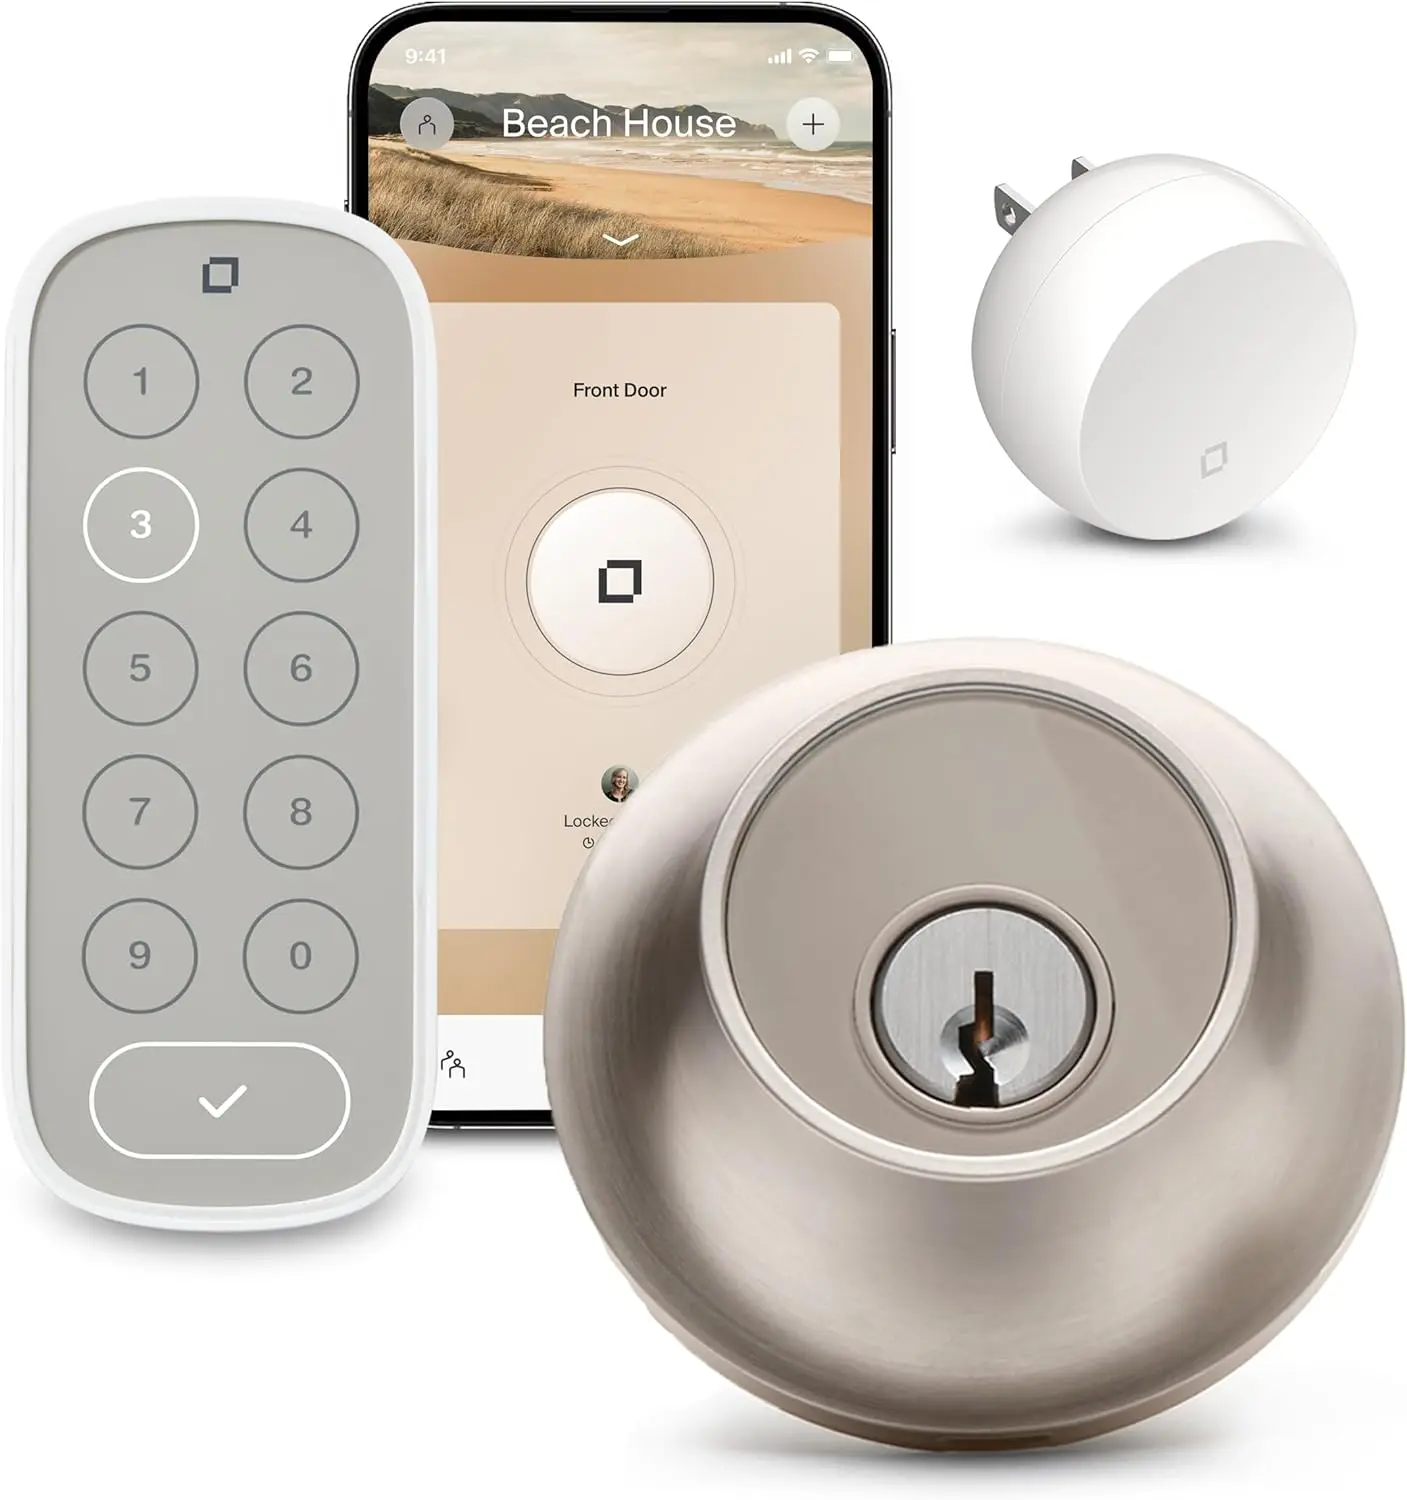 

Level Lock Connect WiFi Smart Lock & Keypad for Keyless Entry - Control Remotely from Anywhere - Weatherproof - Works with iOS